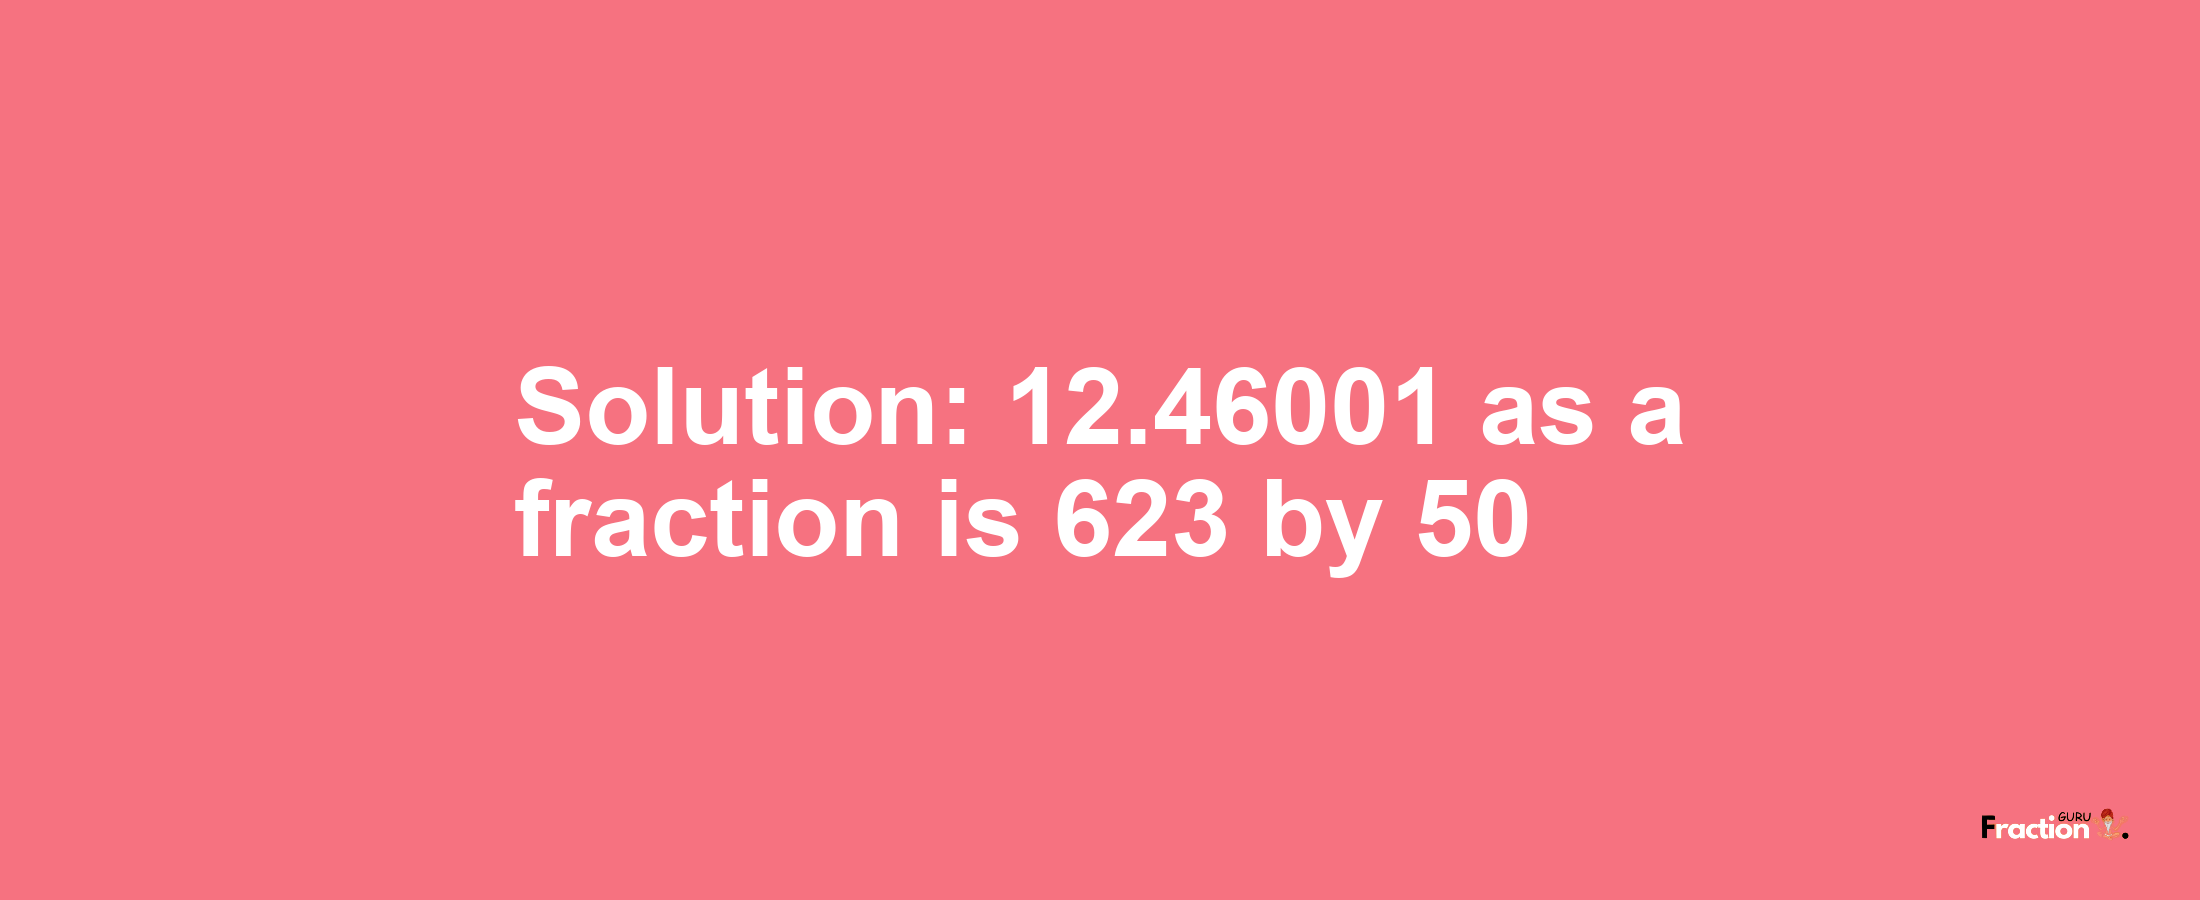 Solution:12.46001 as a fraction is 623/50